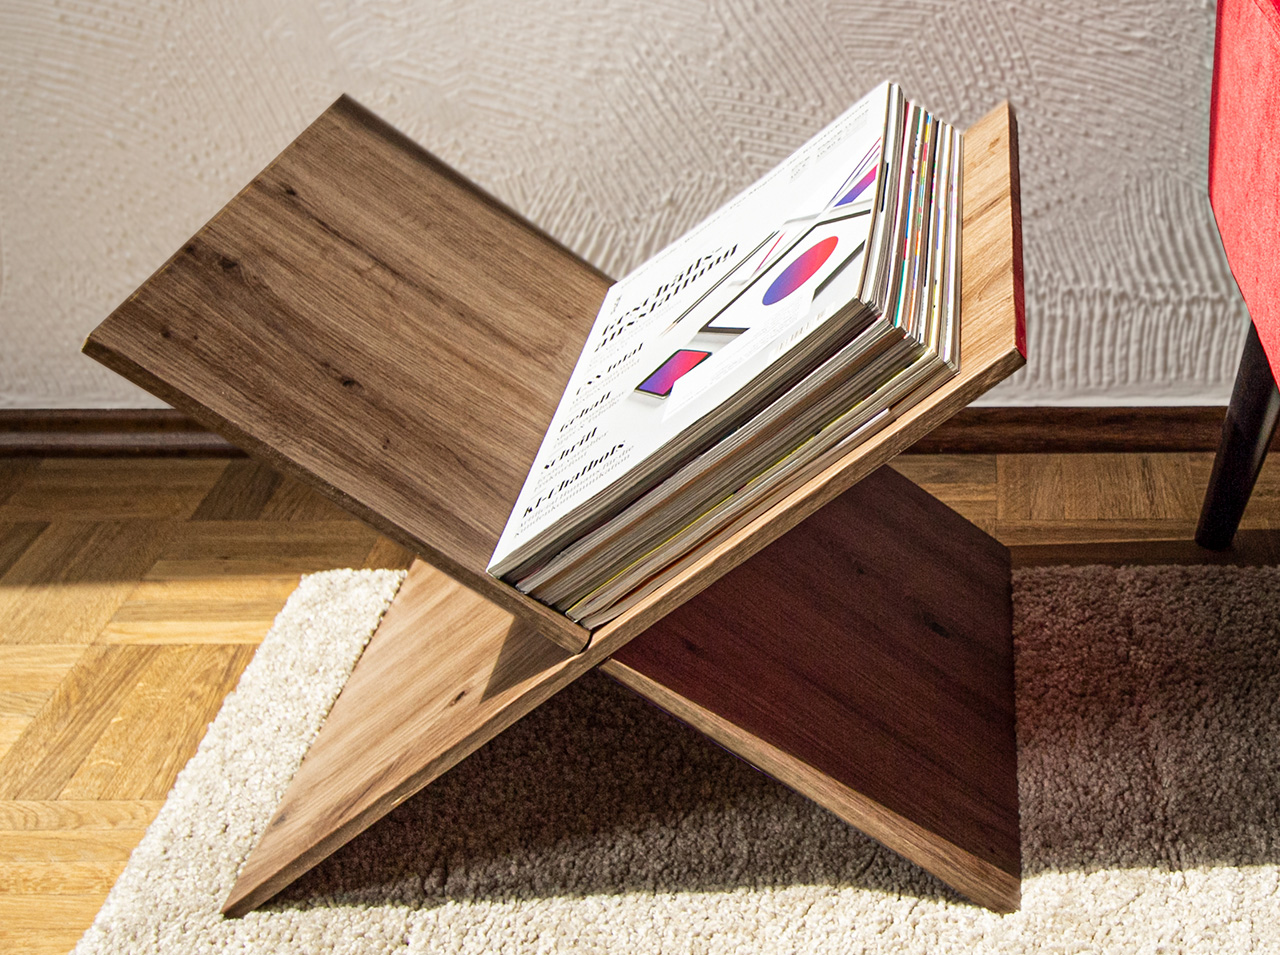 DIY magazine rack made of two wooden boards covered in d-c-fix® Artisan Oak adhesive foil and slotted together.